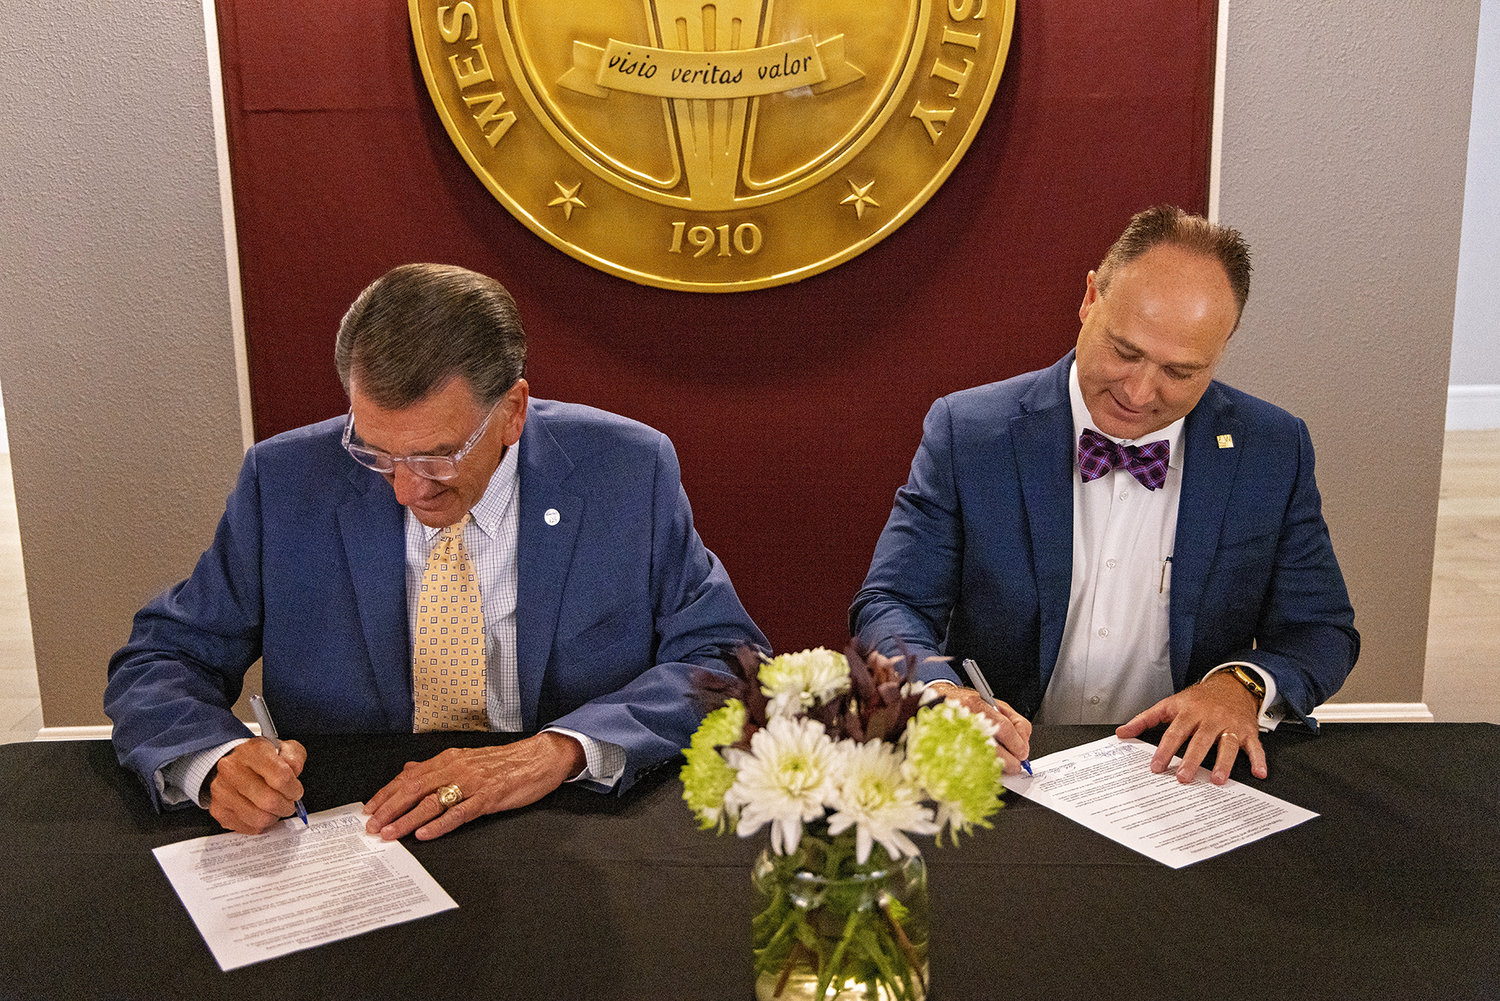 West Texas A&M University President Walter V. Wendler (left) and Weatherford College President Tod Allen Farmer signed a memorandum of understanding on June 28 for a graduate school transfer agreement between the two schools.